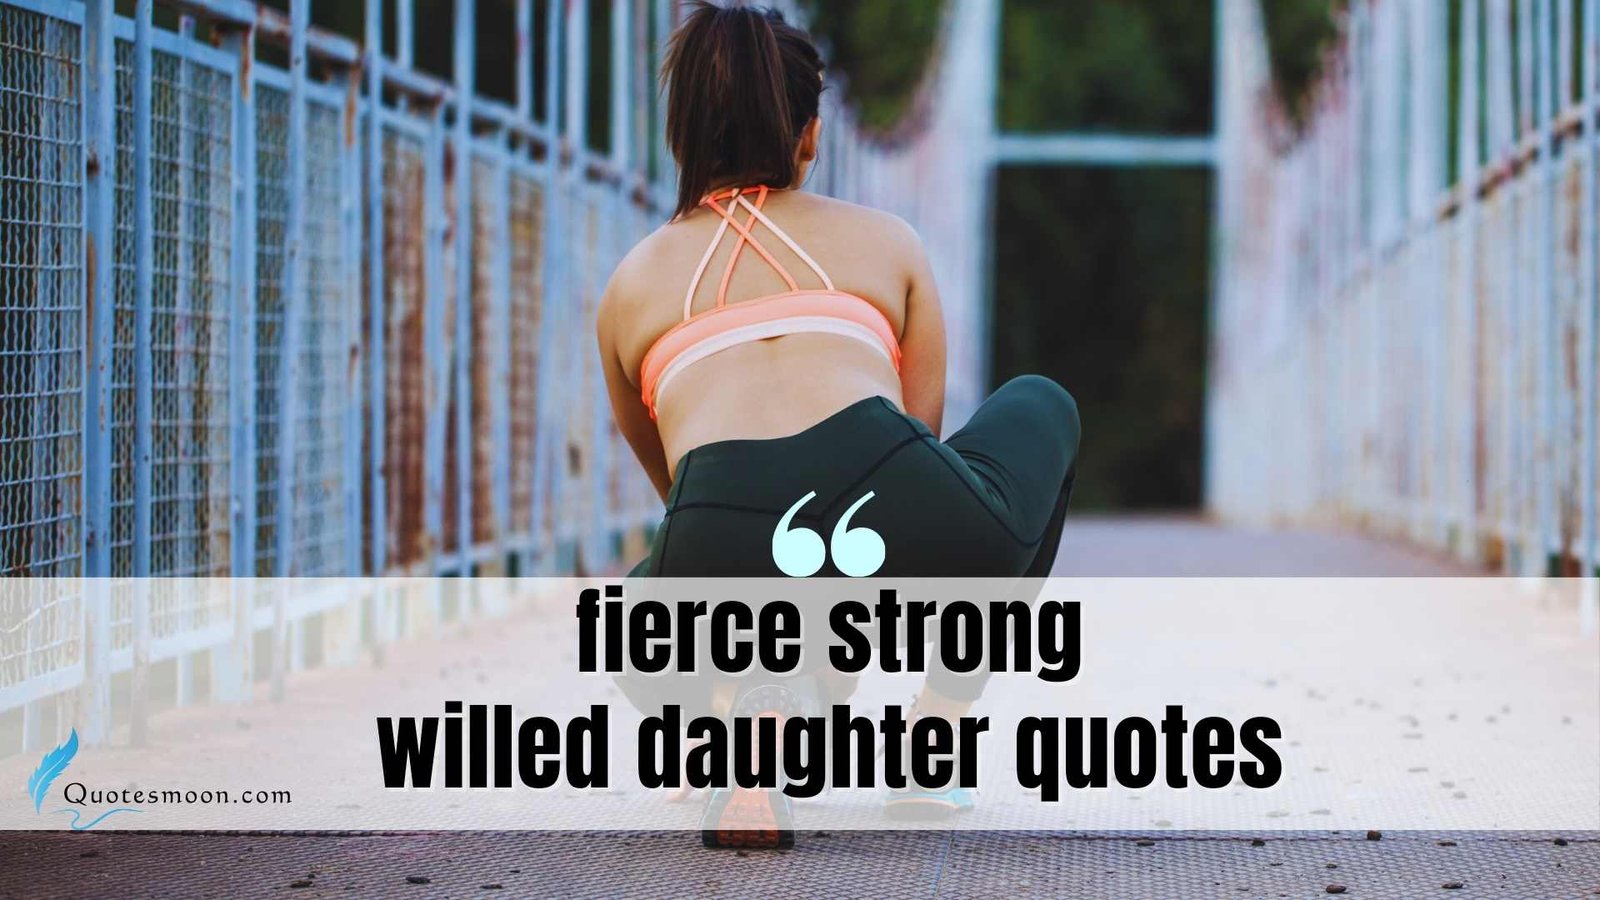 fierce strong willed daughter quotes images